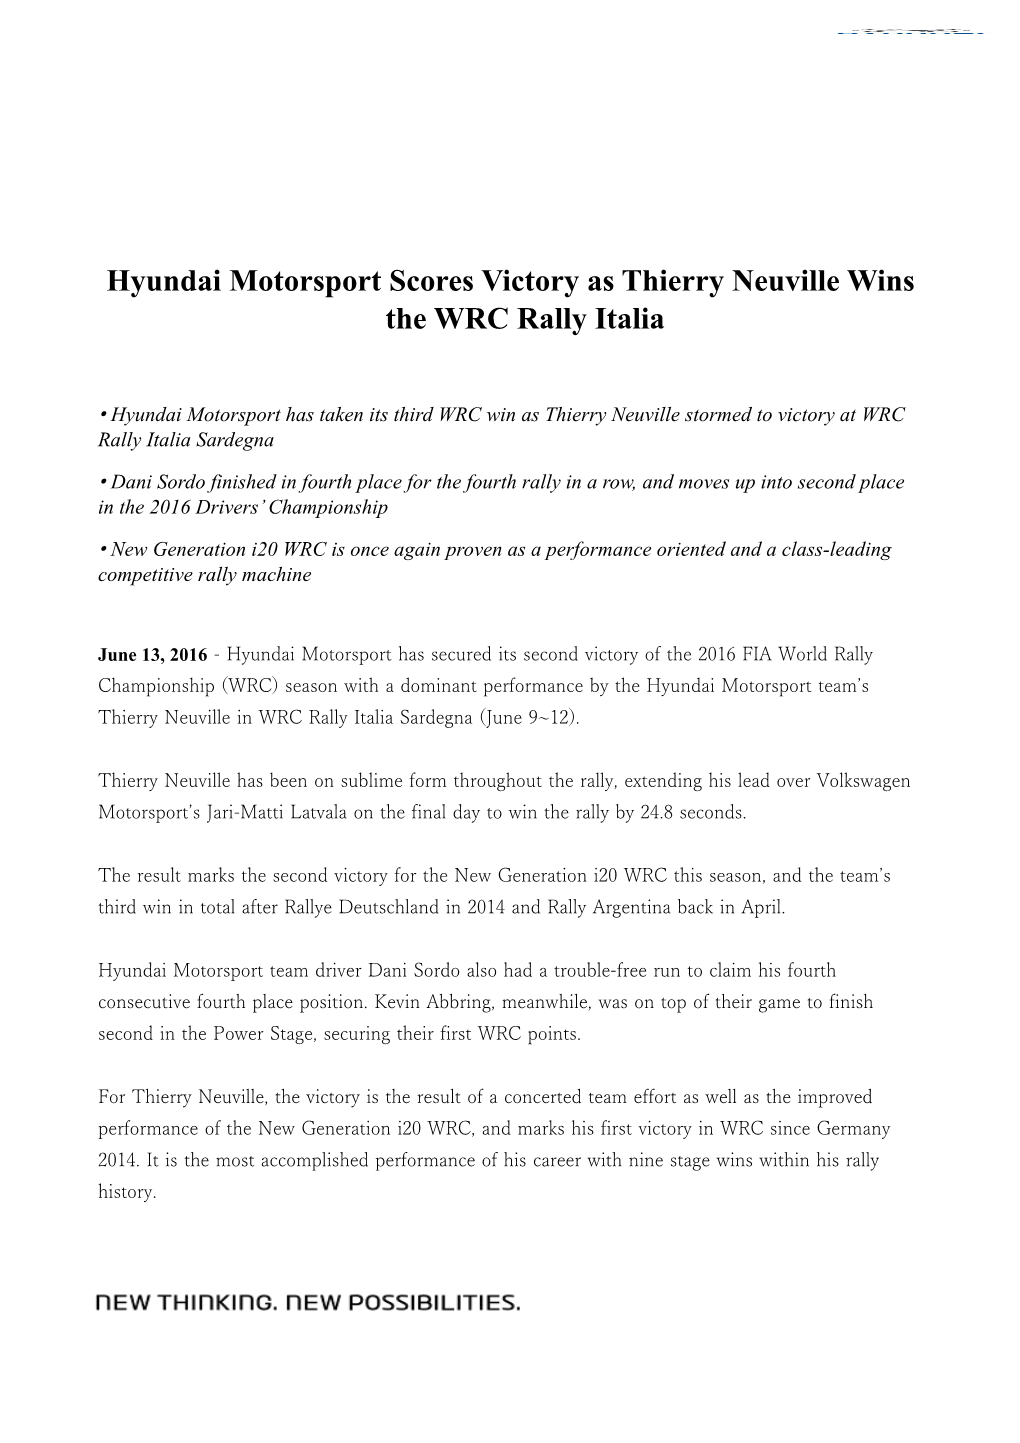 Hyundai Motorsport Scores Victory As Thierry Neuvillewins Thewrc Rally Italia